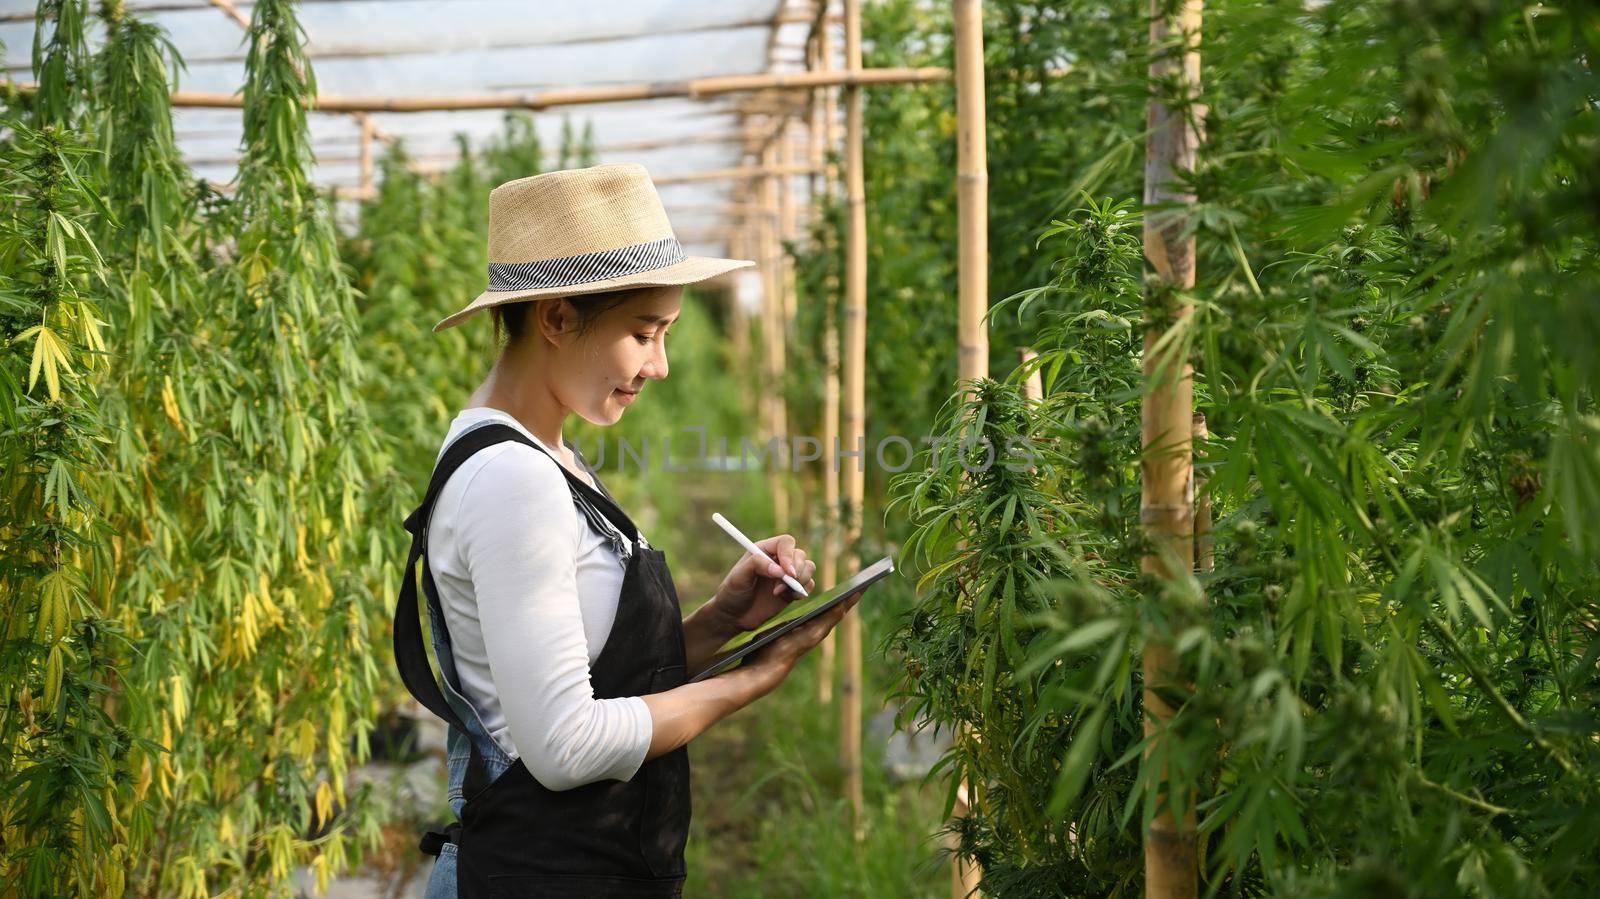 Smiling young smart farmer using digital tablet to monitor control marijuana or cannabis plantation in greenhouse. Agriculture and herbal medicine concept.